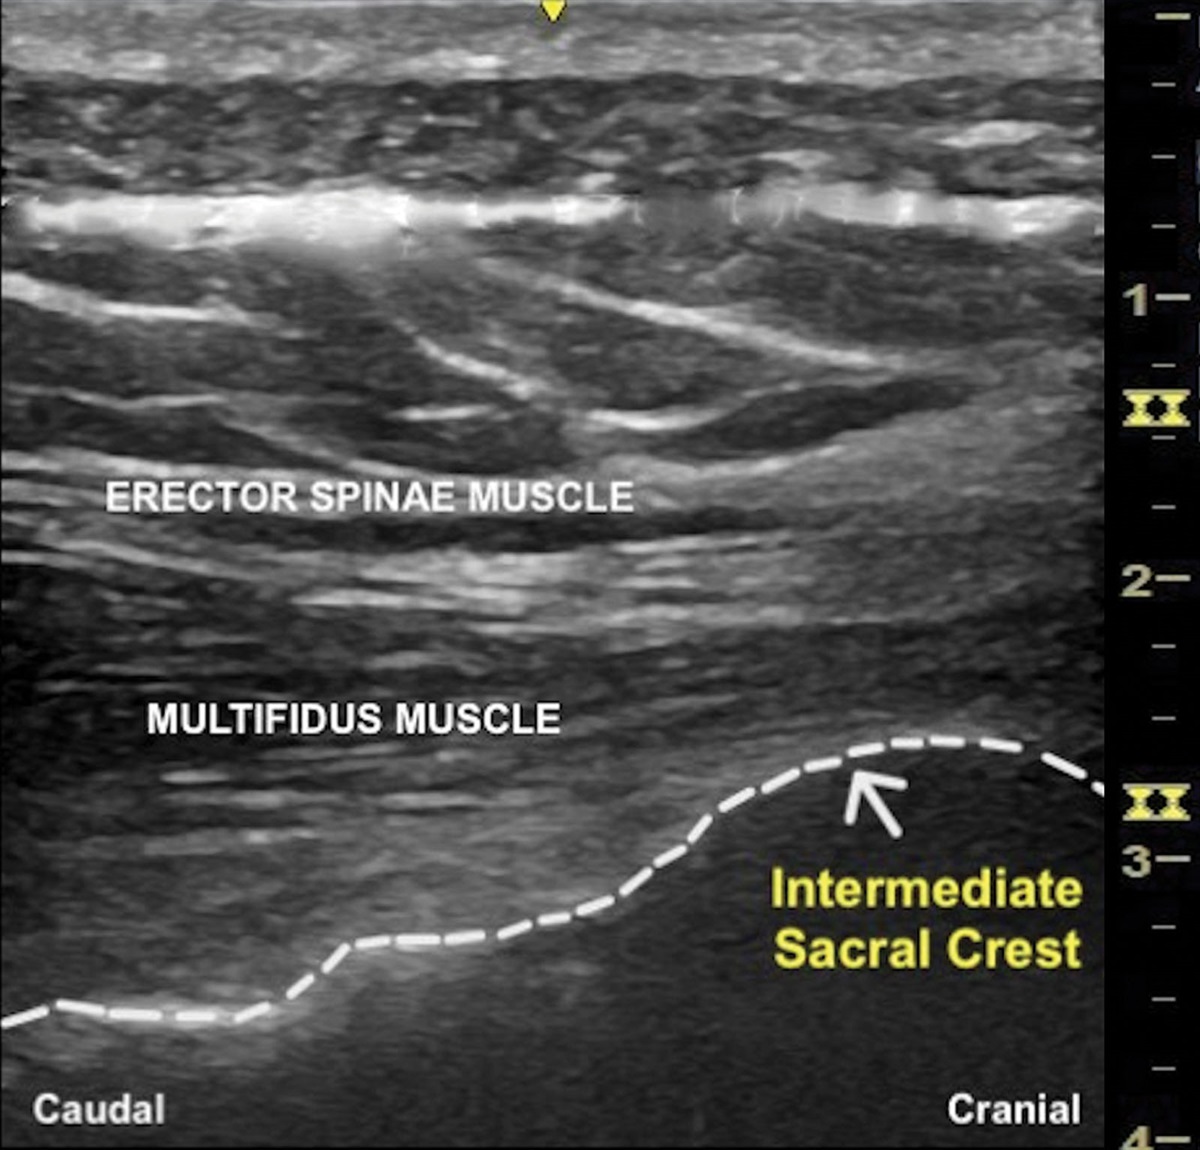 Ultrasound-Guided Sacral Erector Spinae Plane Block: A Feasible Option for Pain Management During Magnetic Resonance Imaging: A Case Report